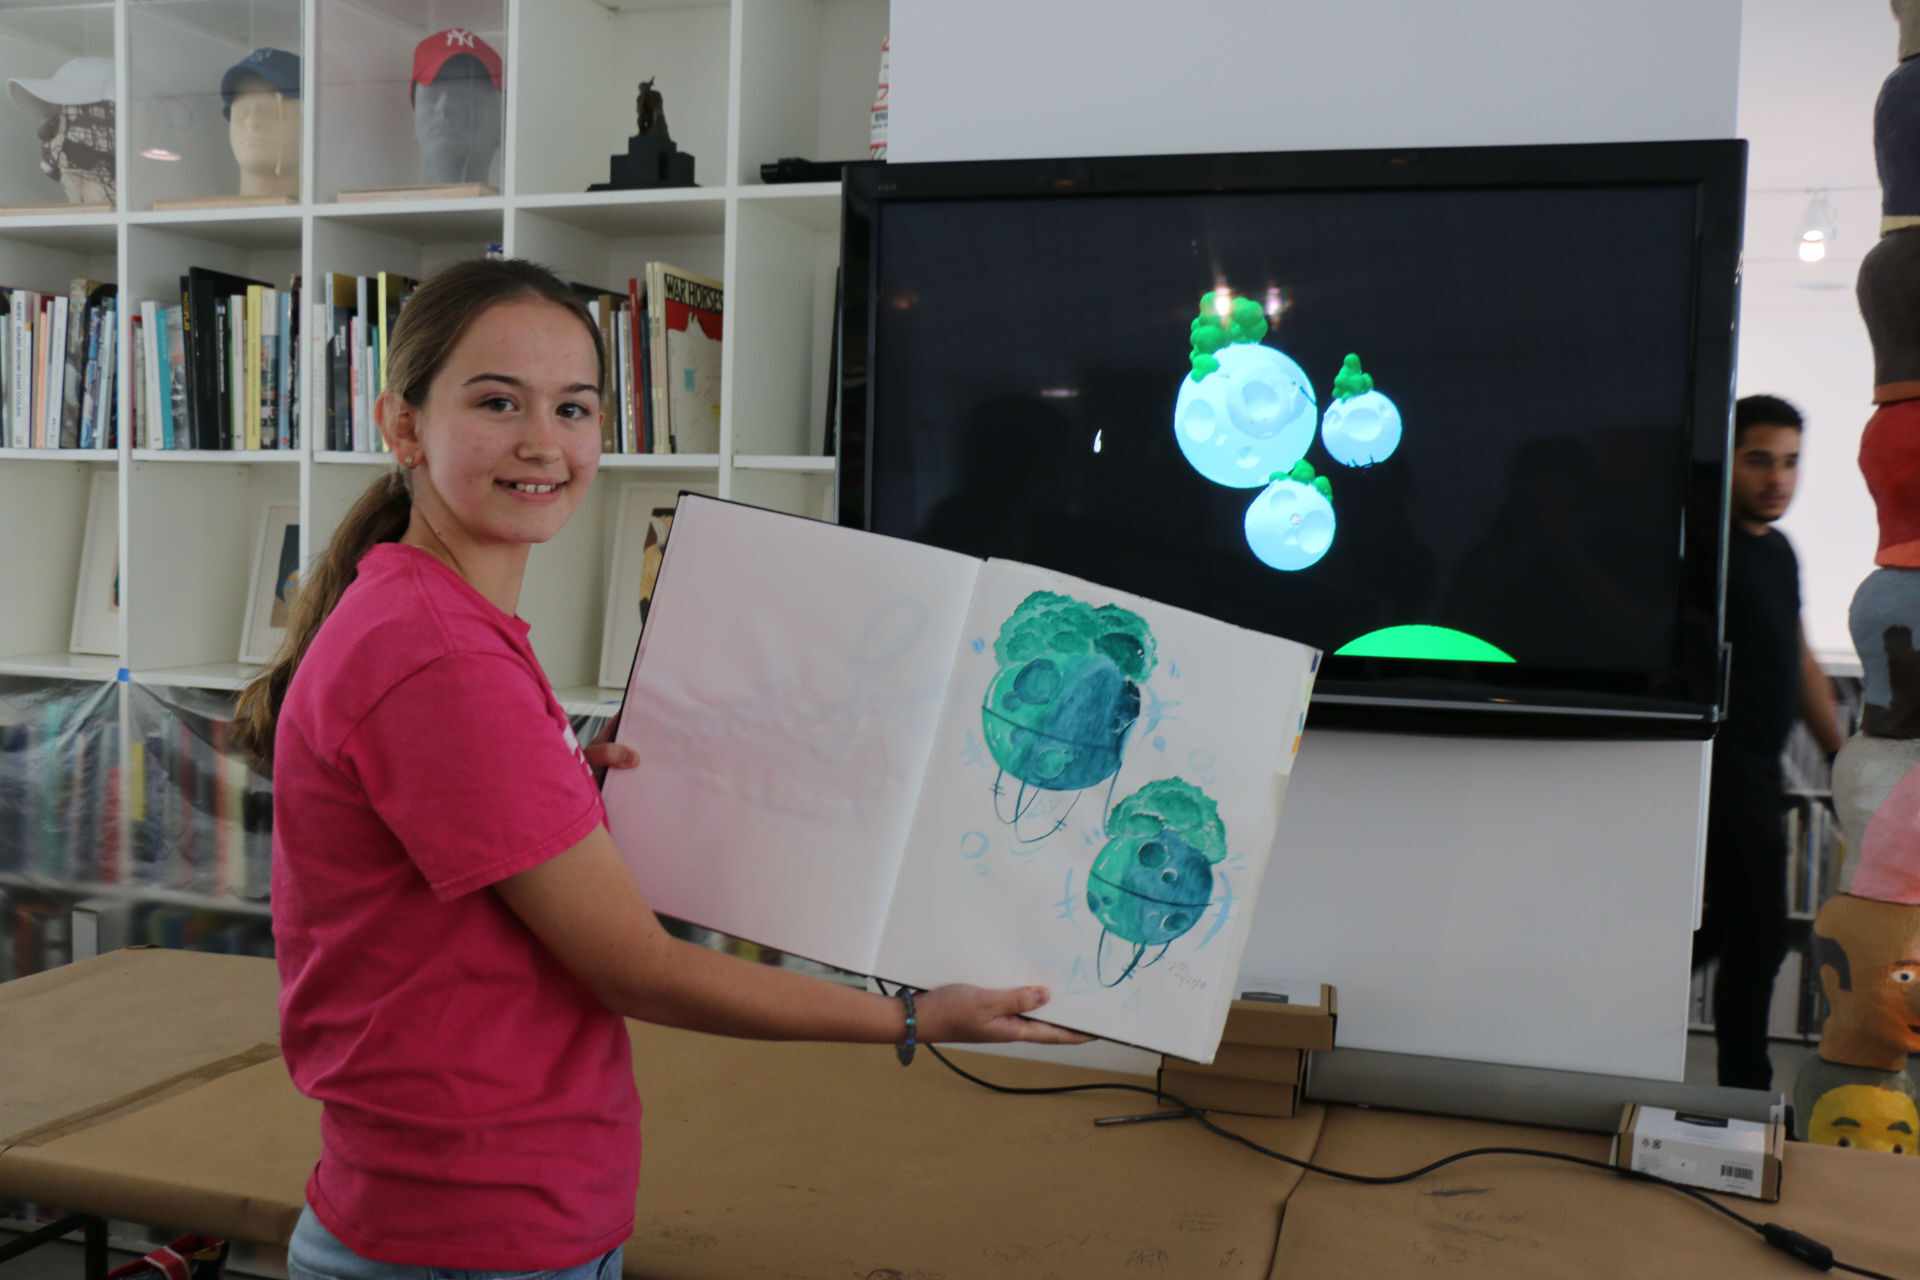 Girl showing a drawing